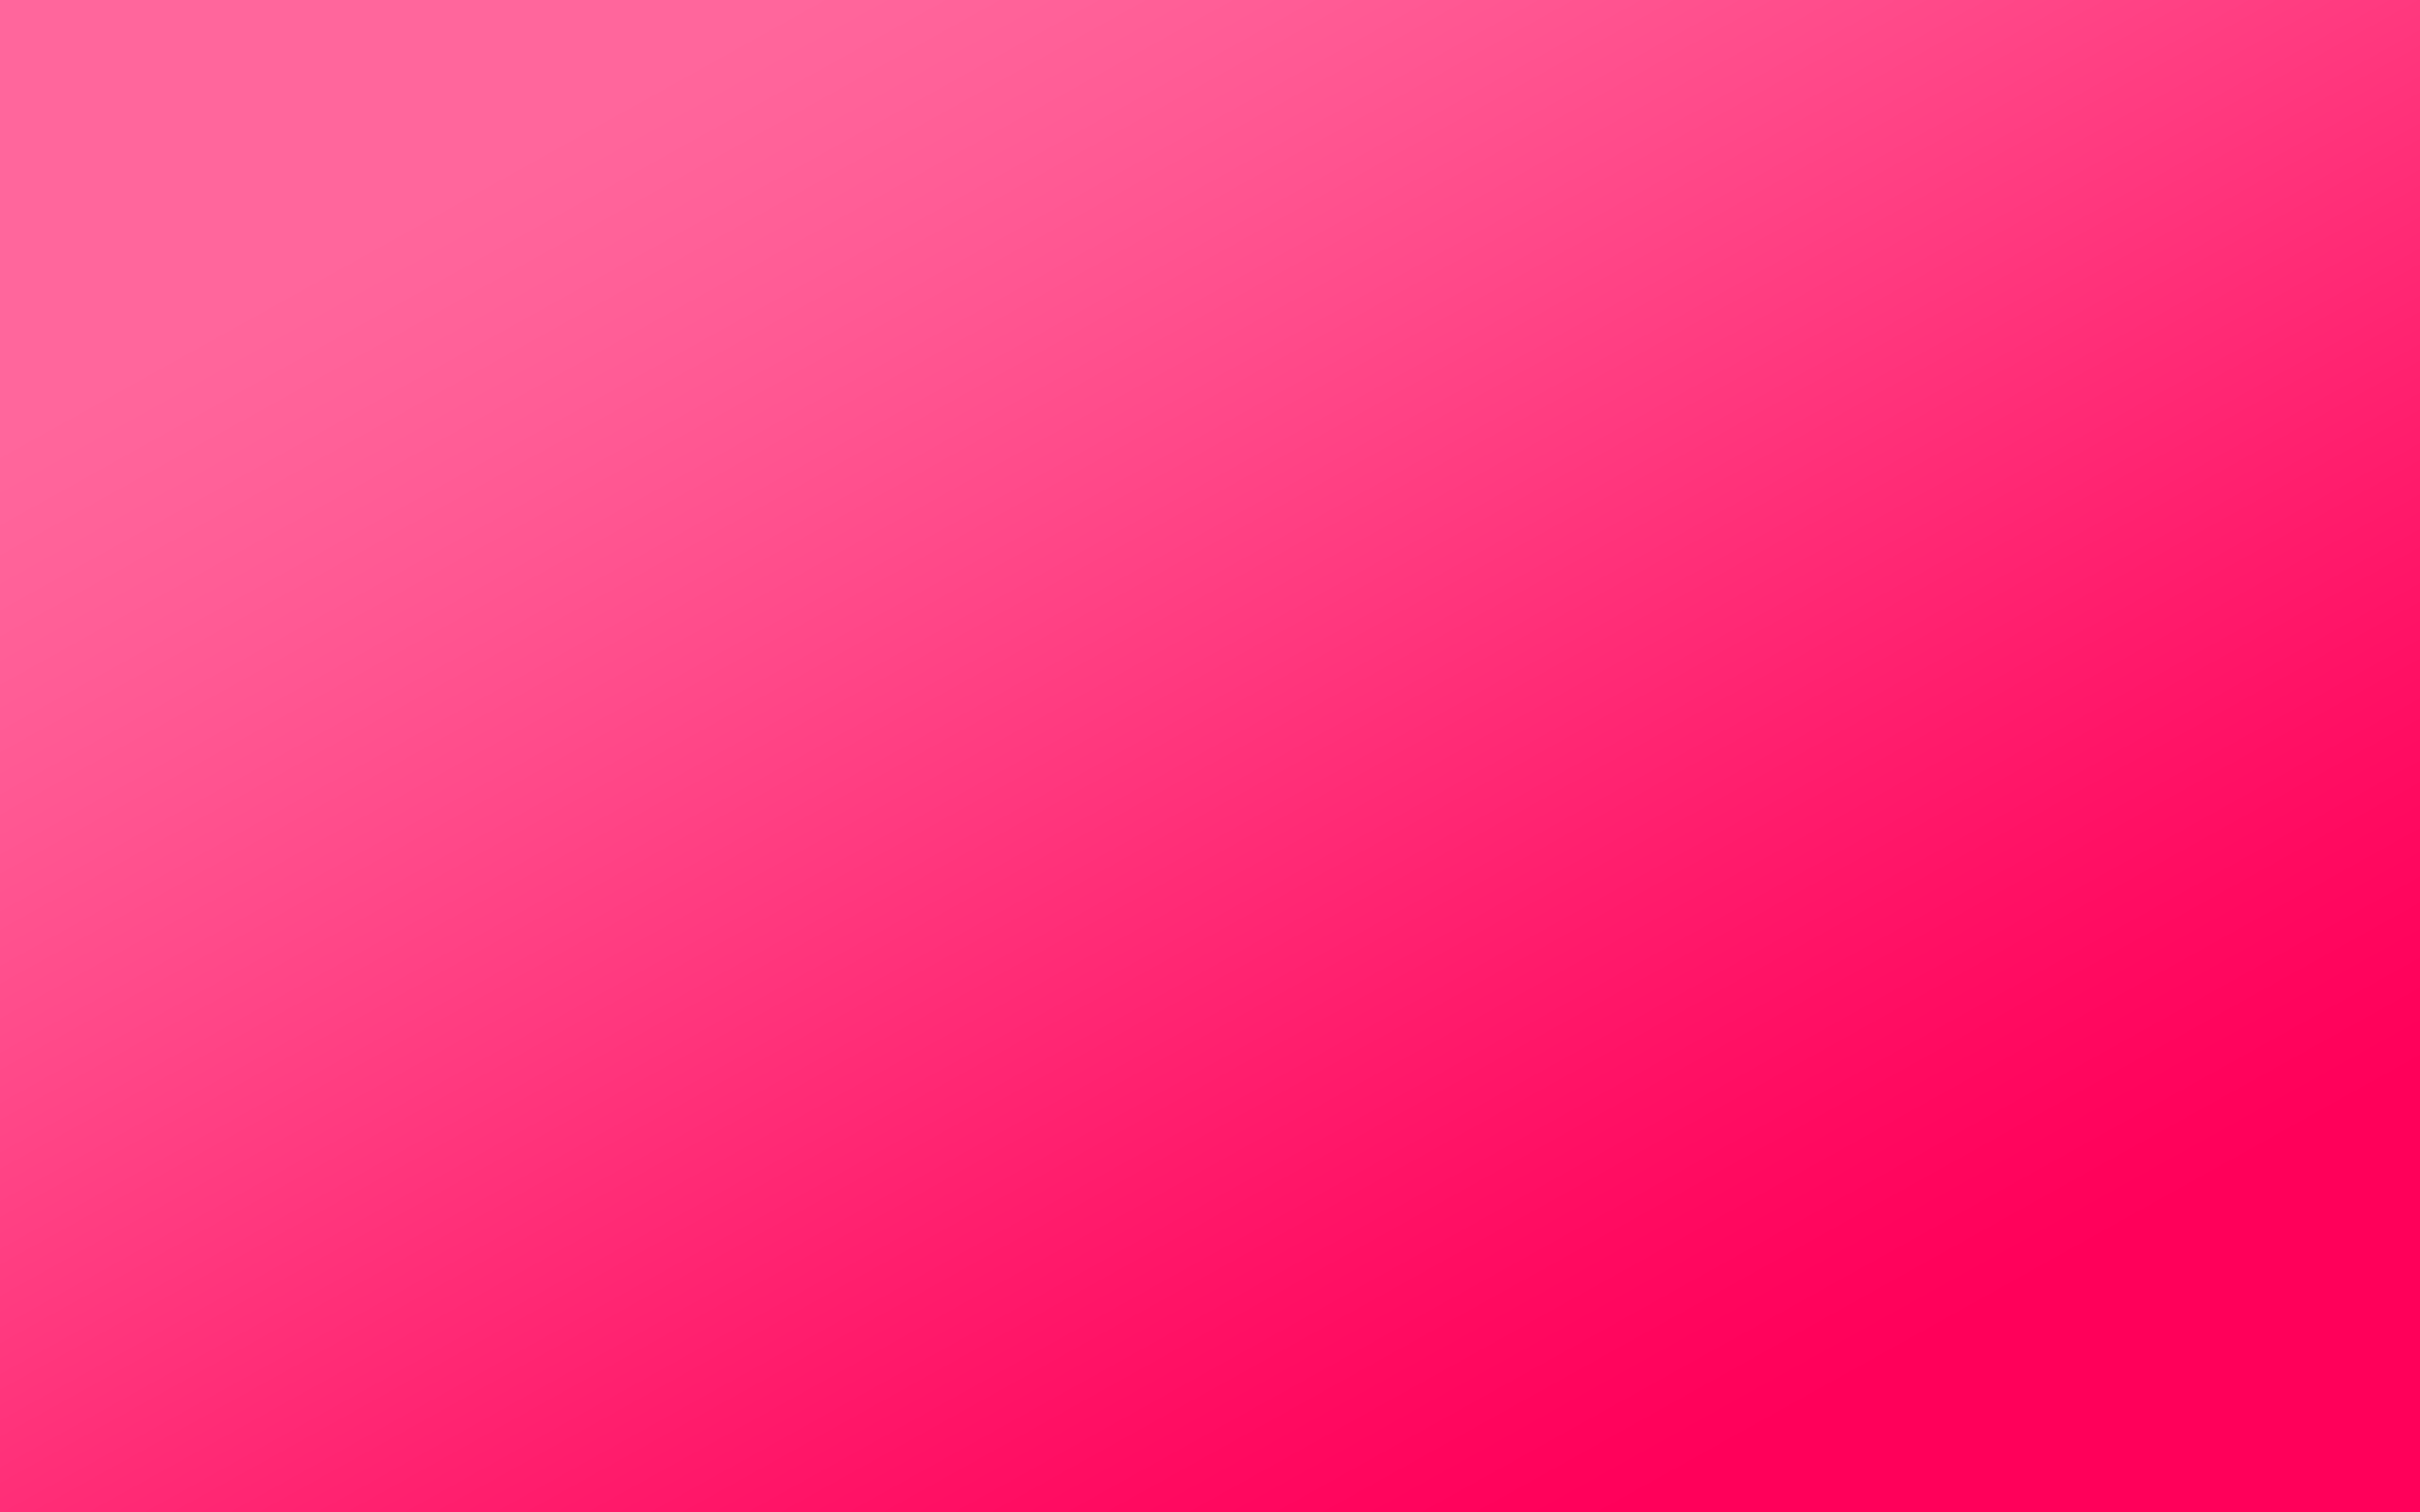 Pink Images For Backgrounds